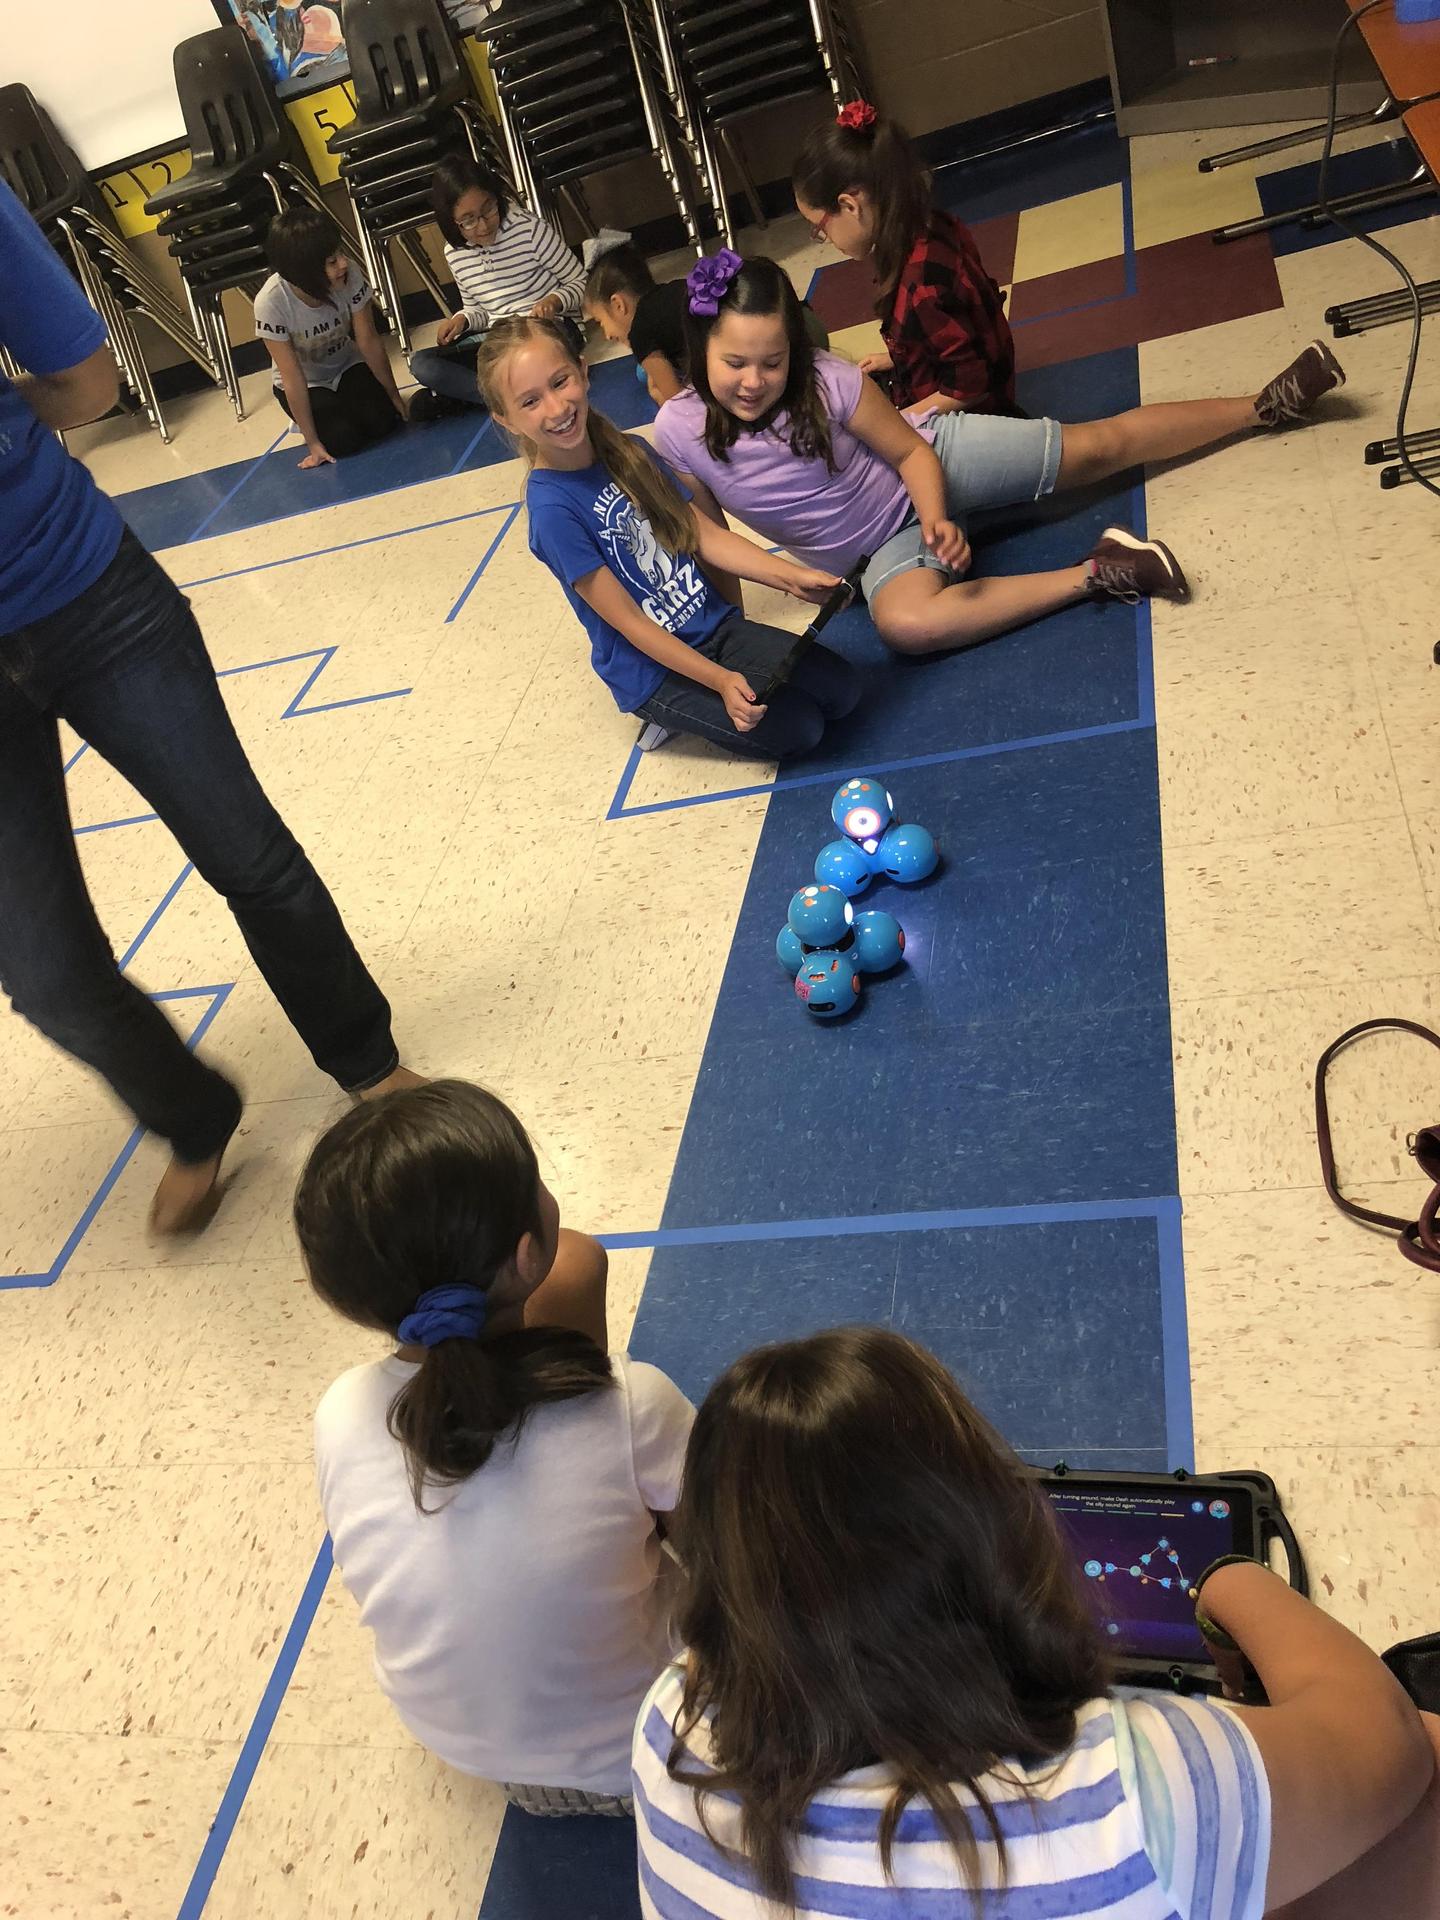 Students working with small robots on the floor